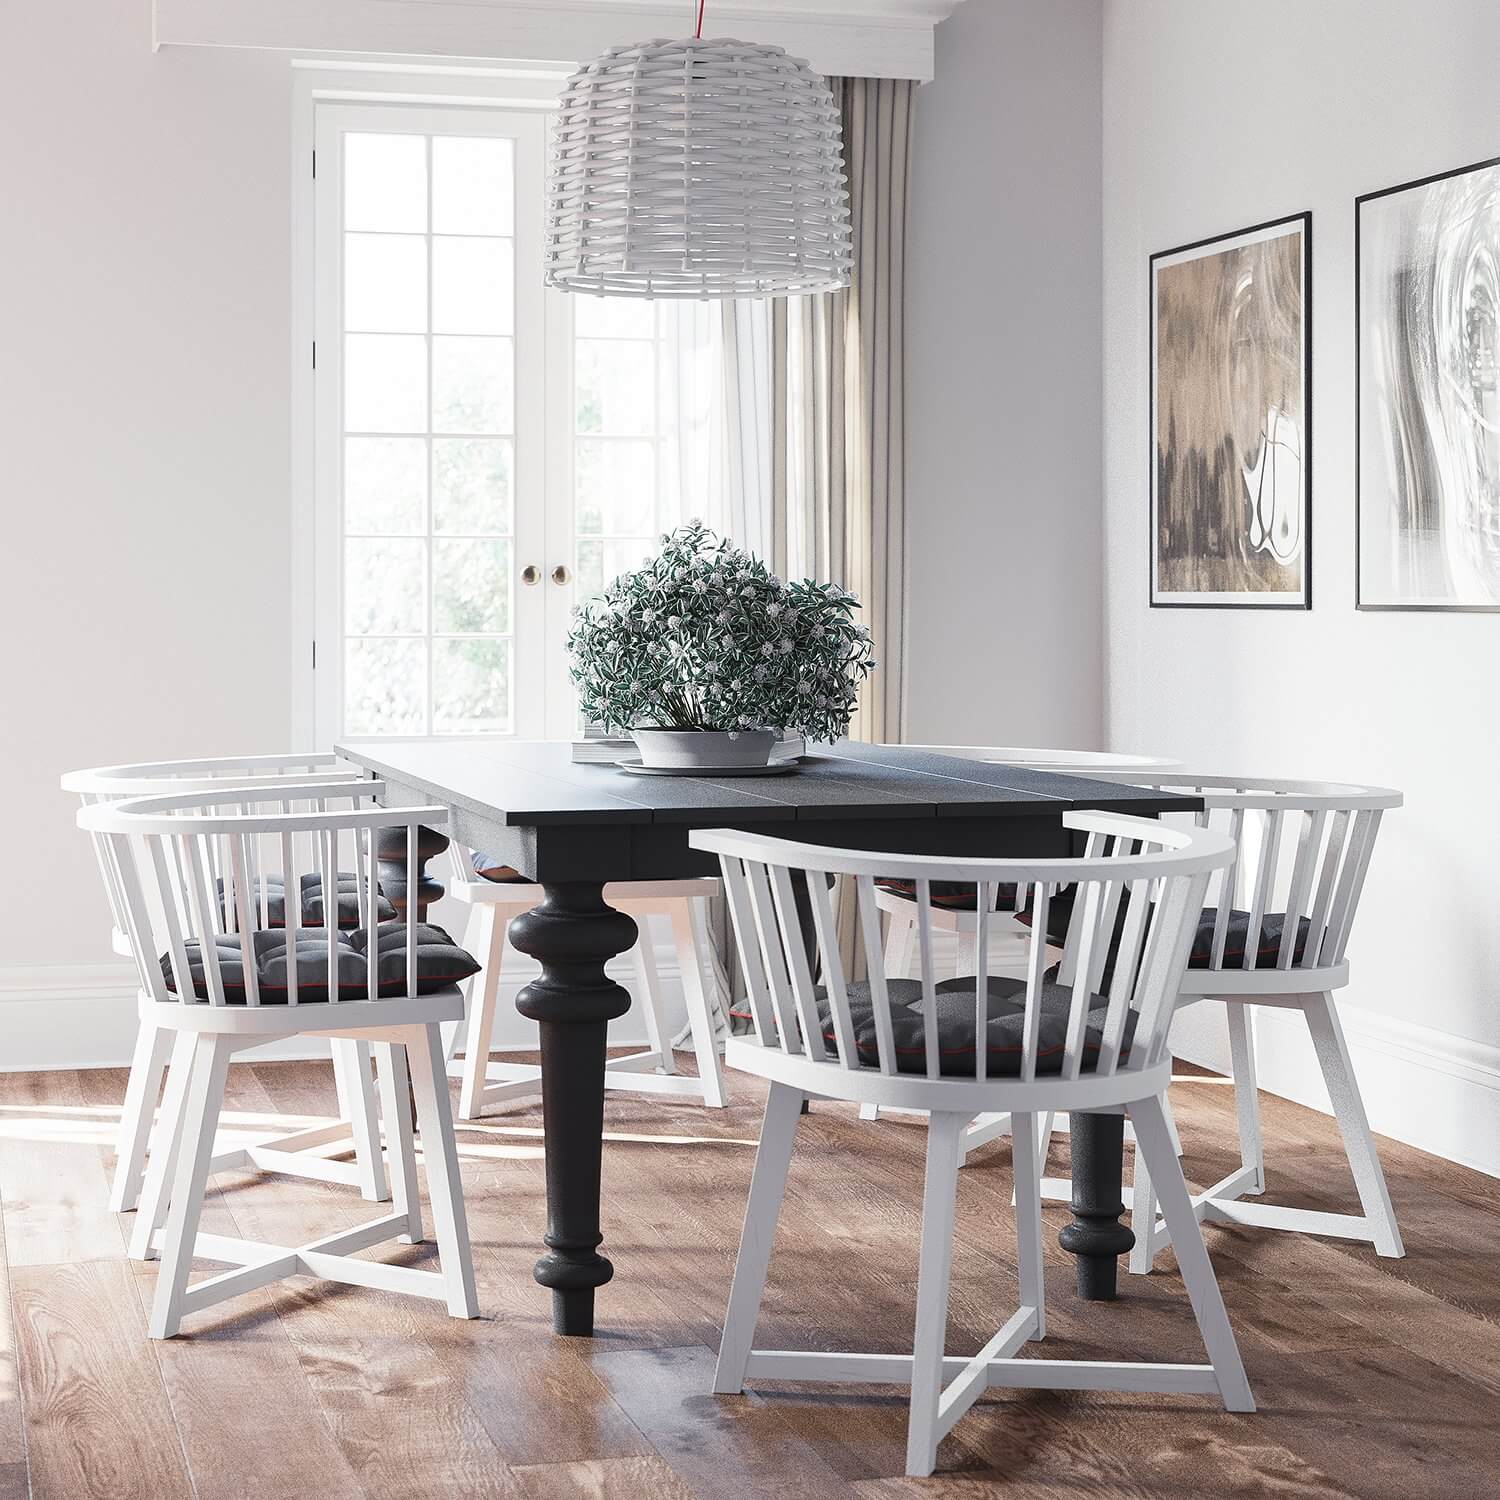 Classic flat dining area wood chair and table - cgi visualization